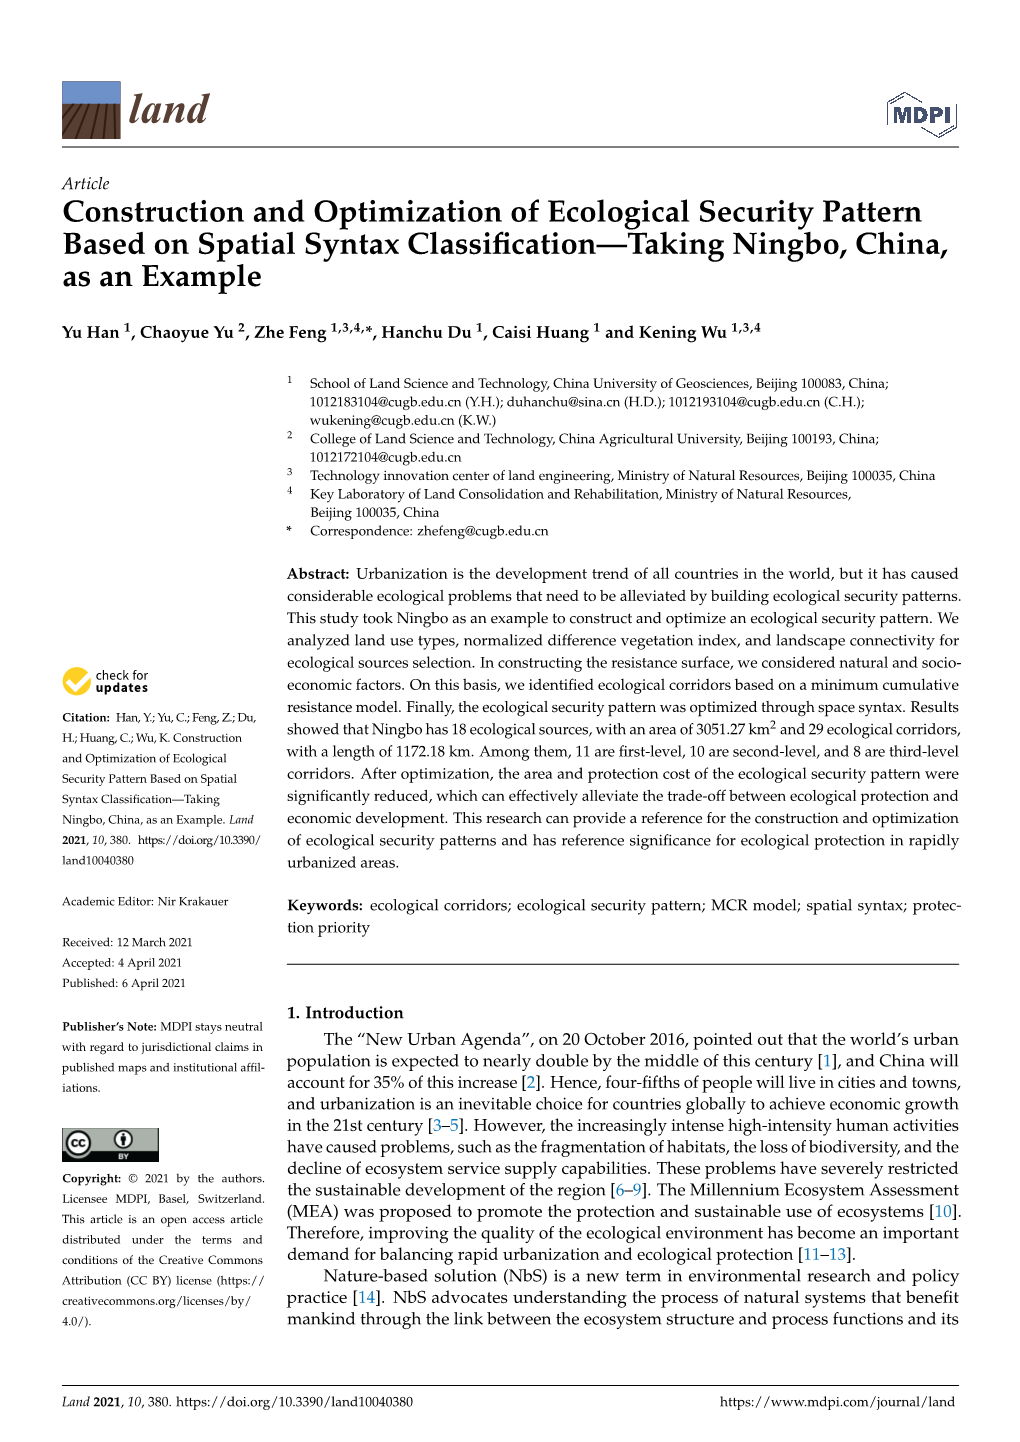 Construction and Optimization of Ecological Security Pattern Based on Spatial Syntax Classiﬁcation—Taking Ningbo, China, As an Example